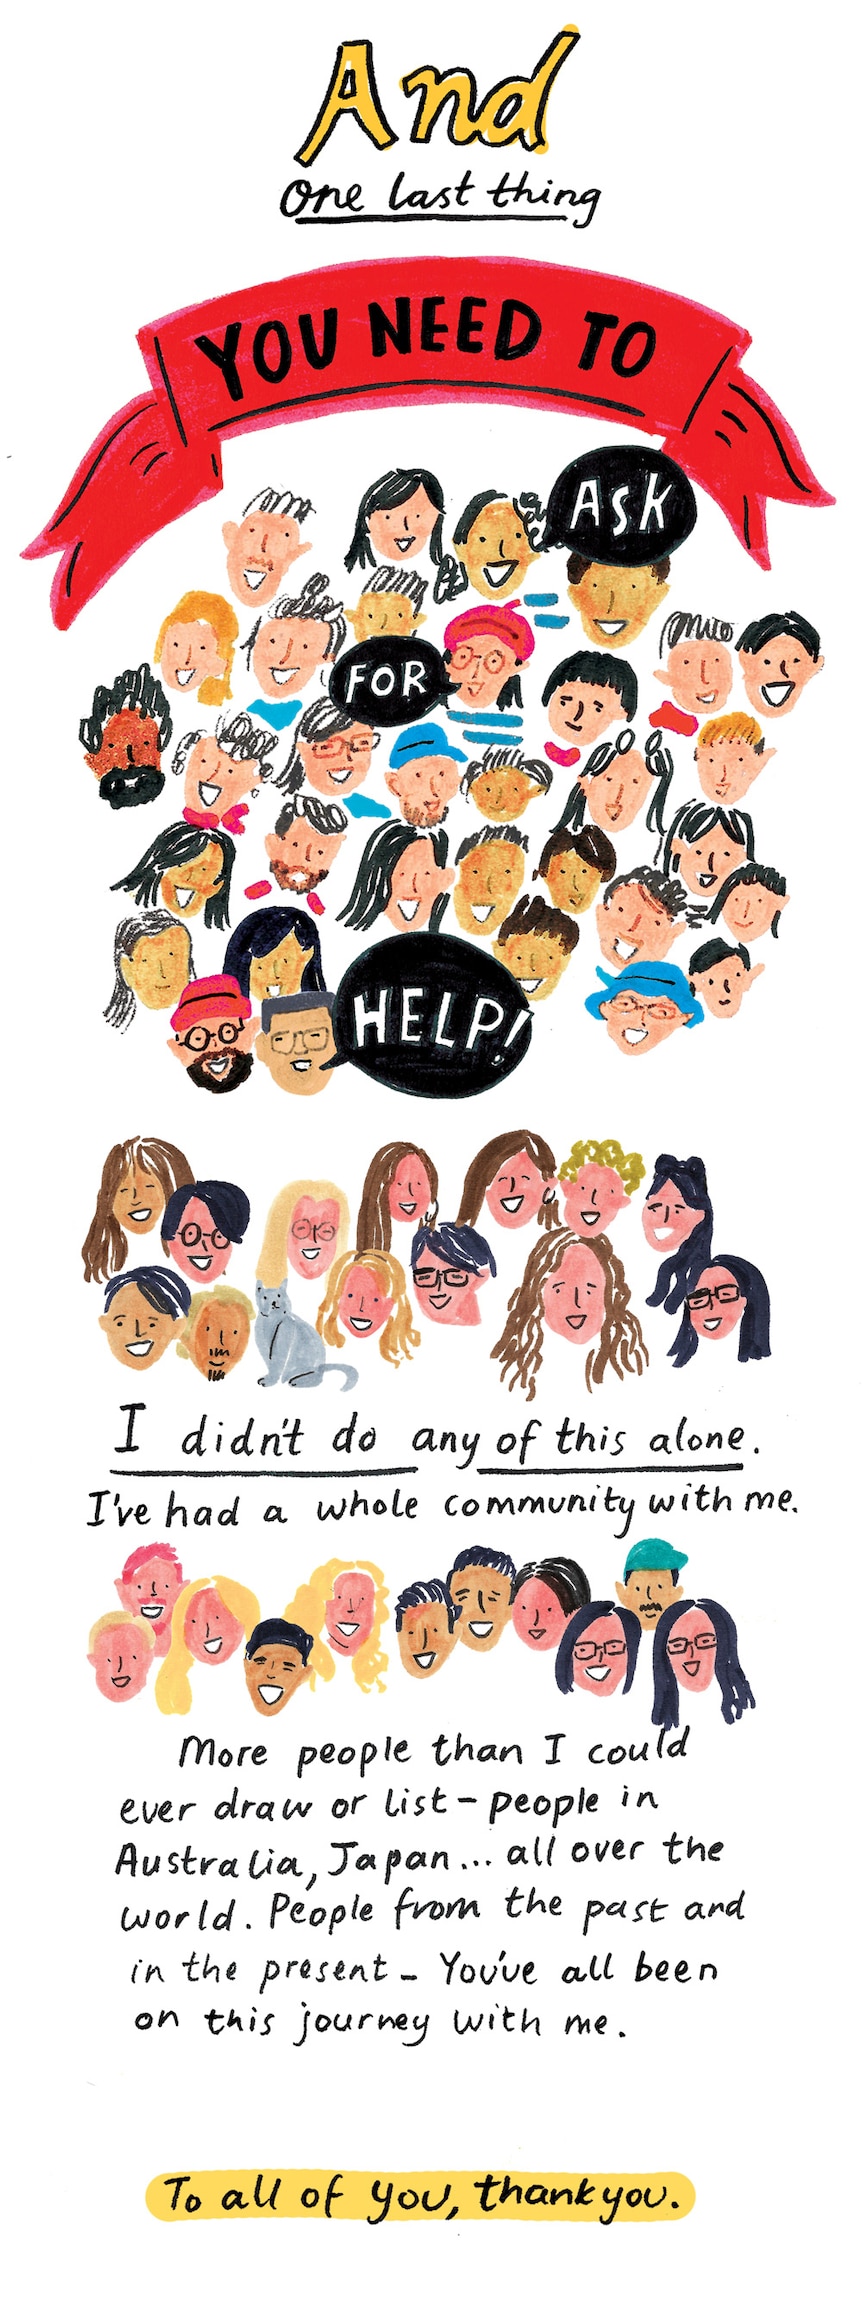 "And one last thing: You need to ask for help. I didn't do this alone. I had a whole community with me. So thank you.